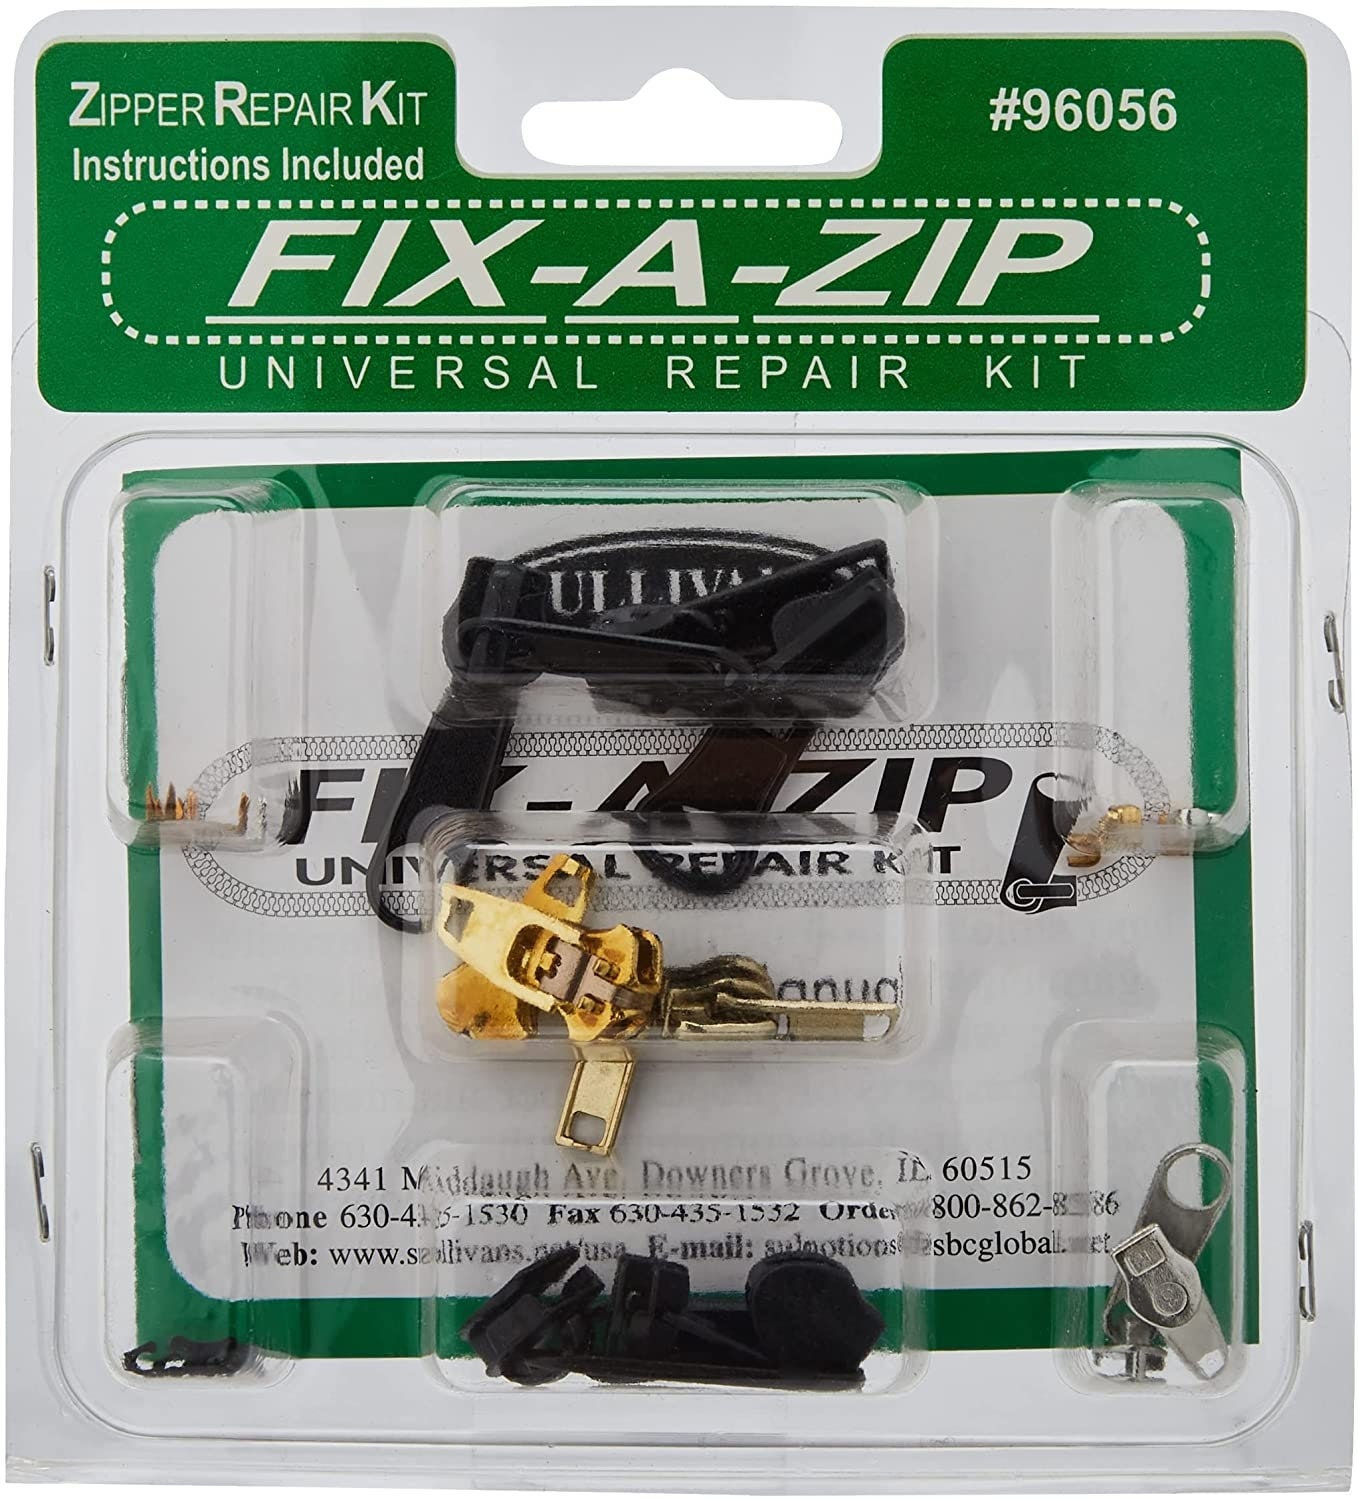 Zipper Repair Kit - #5 Vislon Auto Lock Sliders - 3 Universal Sliders and  Stops Included - Made in The United States